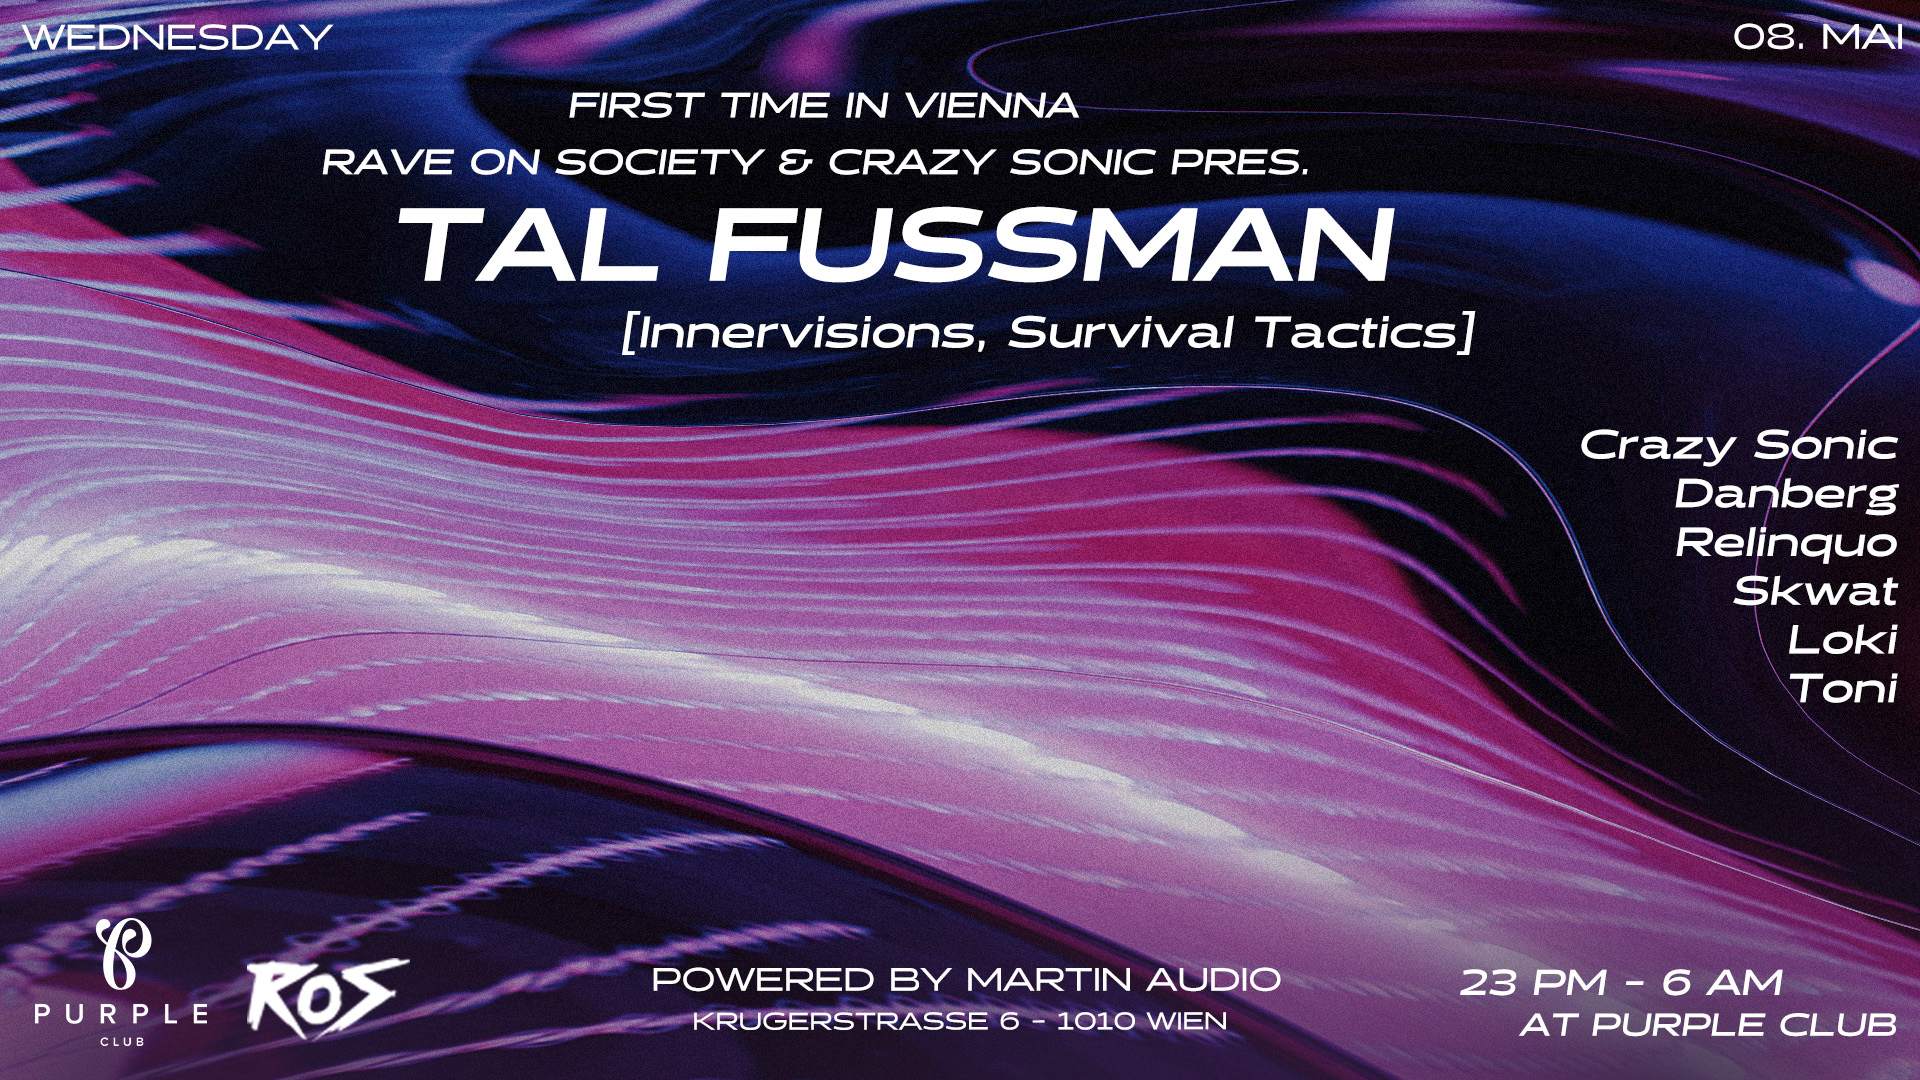 Tal Fussman first time in Vienna by RaveOnSociety & Crazy Sonic - Página frontal